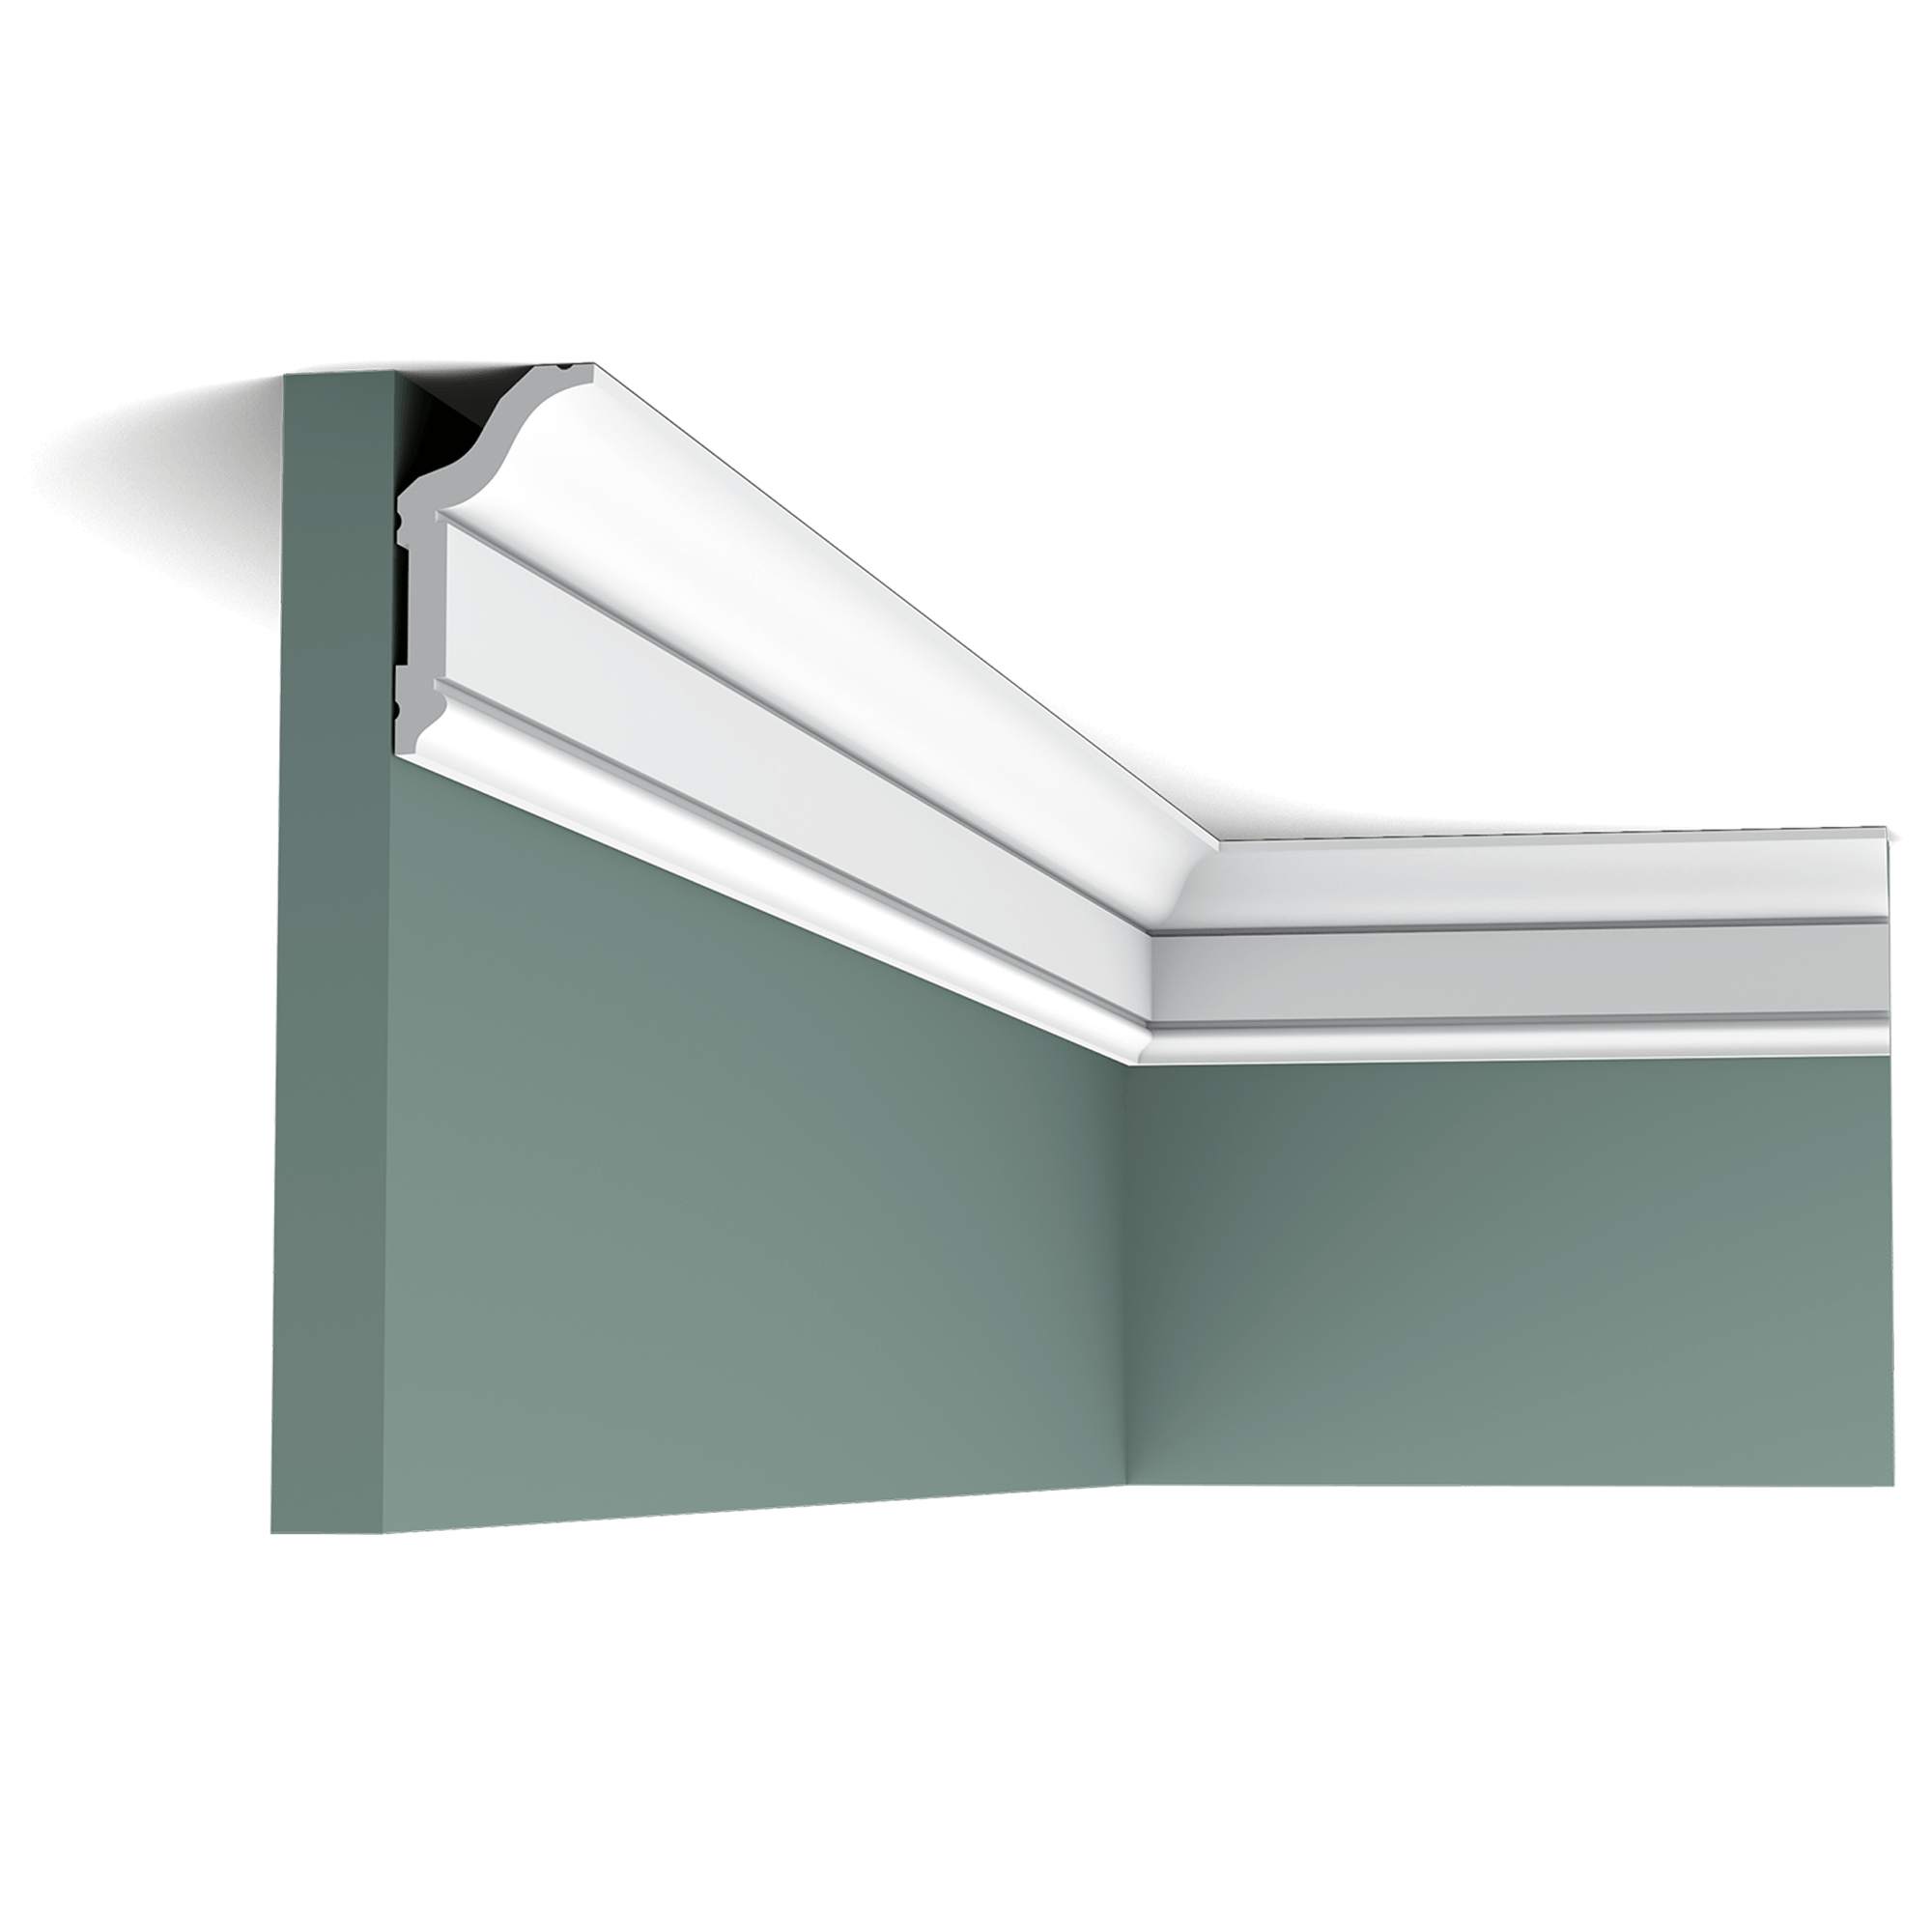 Medium-sized profile with cyma recta curvature and large extended base.